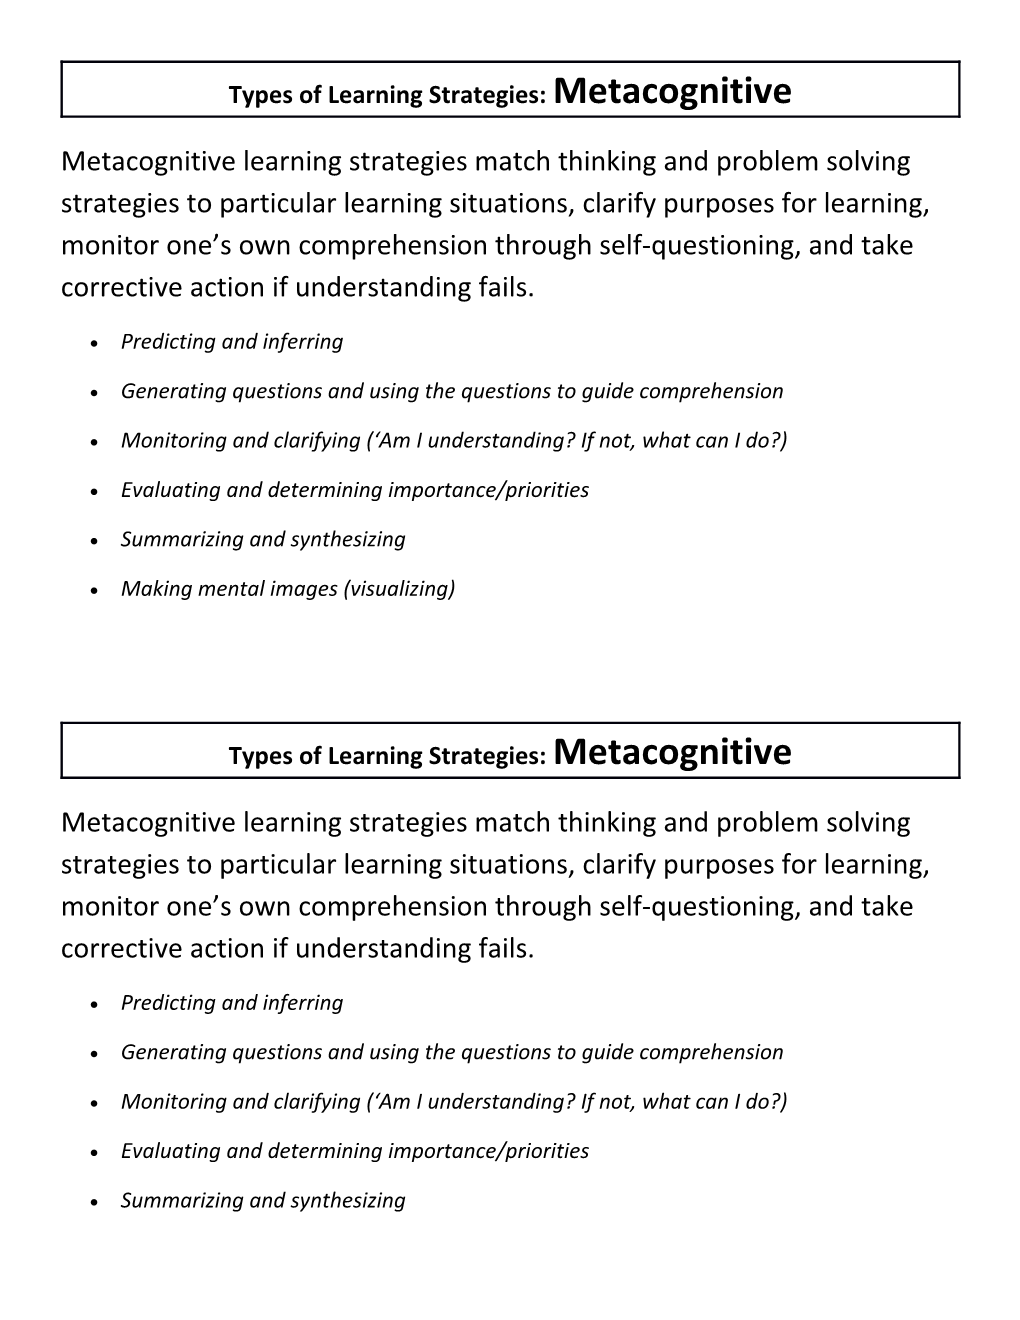 Types of Learning Strategies: Metacognitive